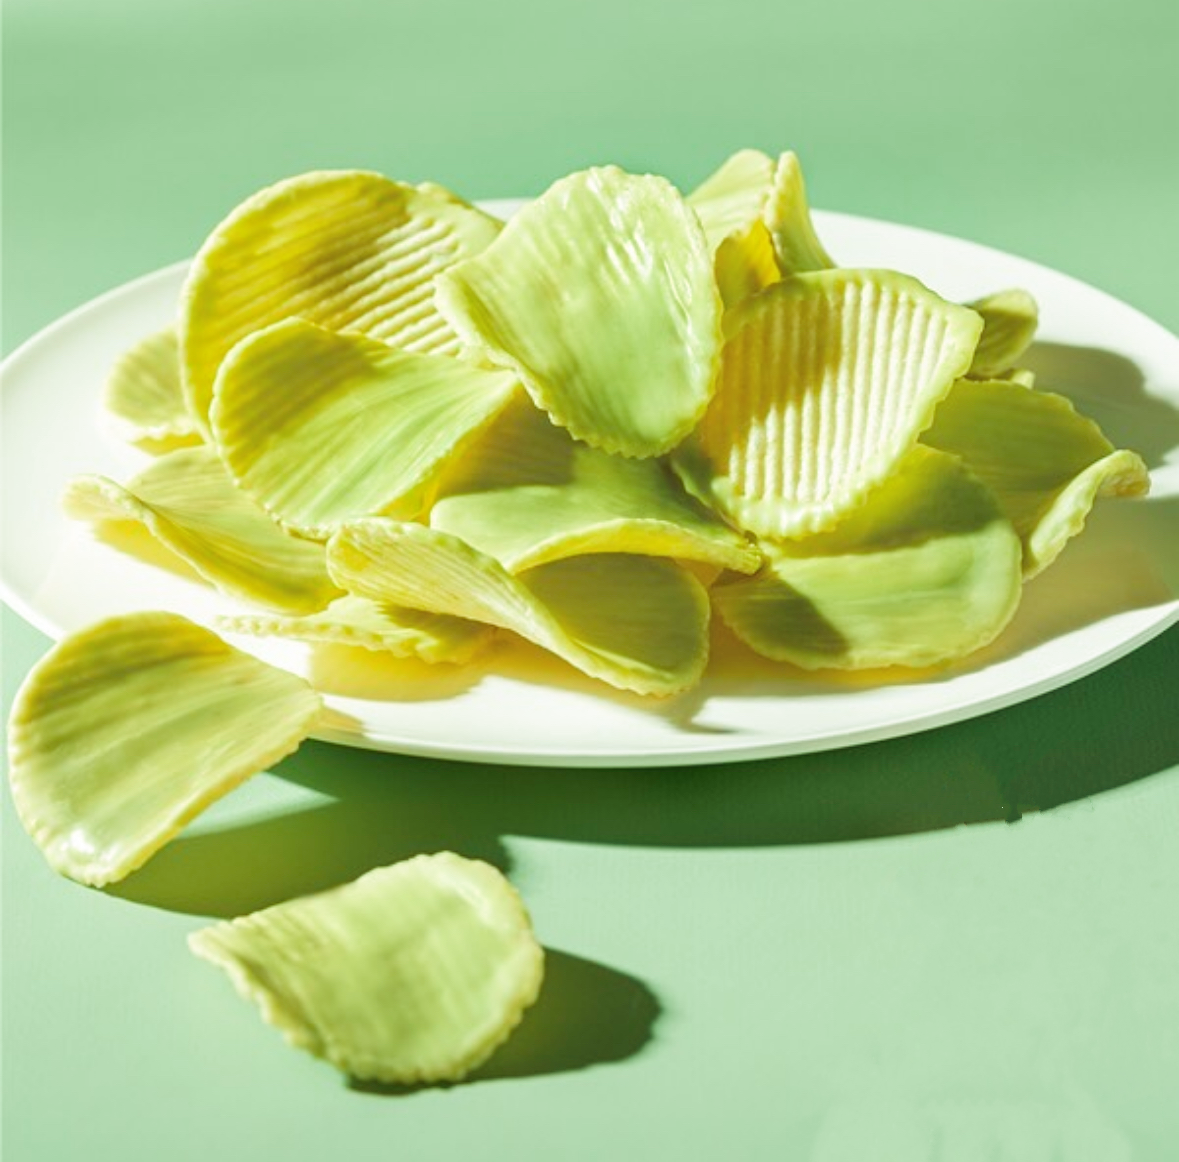 LIMITED EDTN: Green Tea-White Chocolate Covered Potato Chips